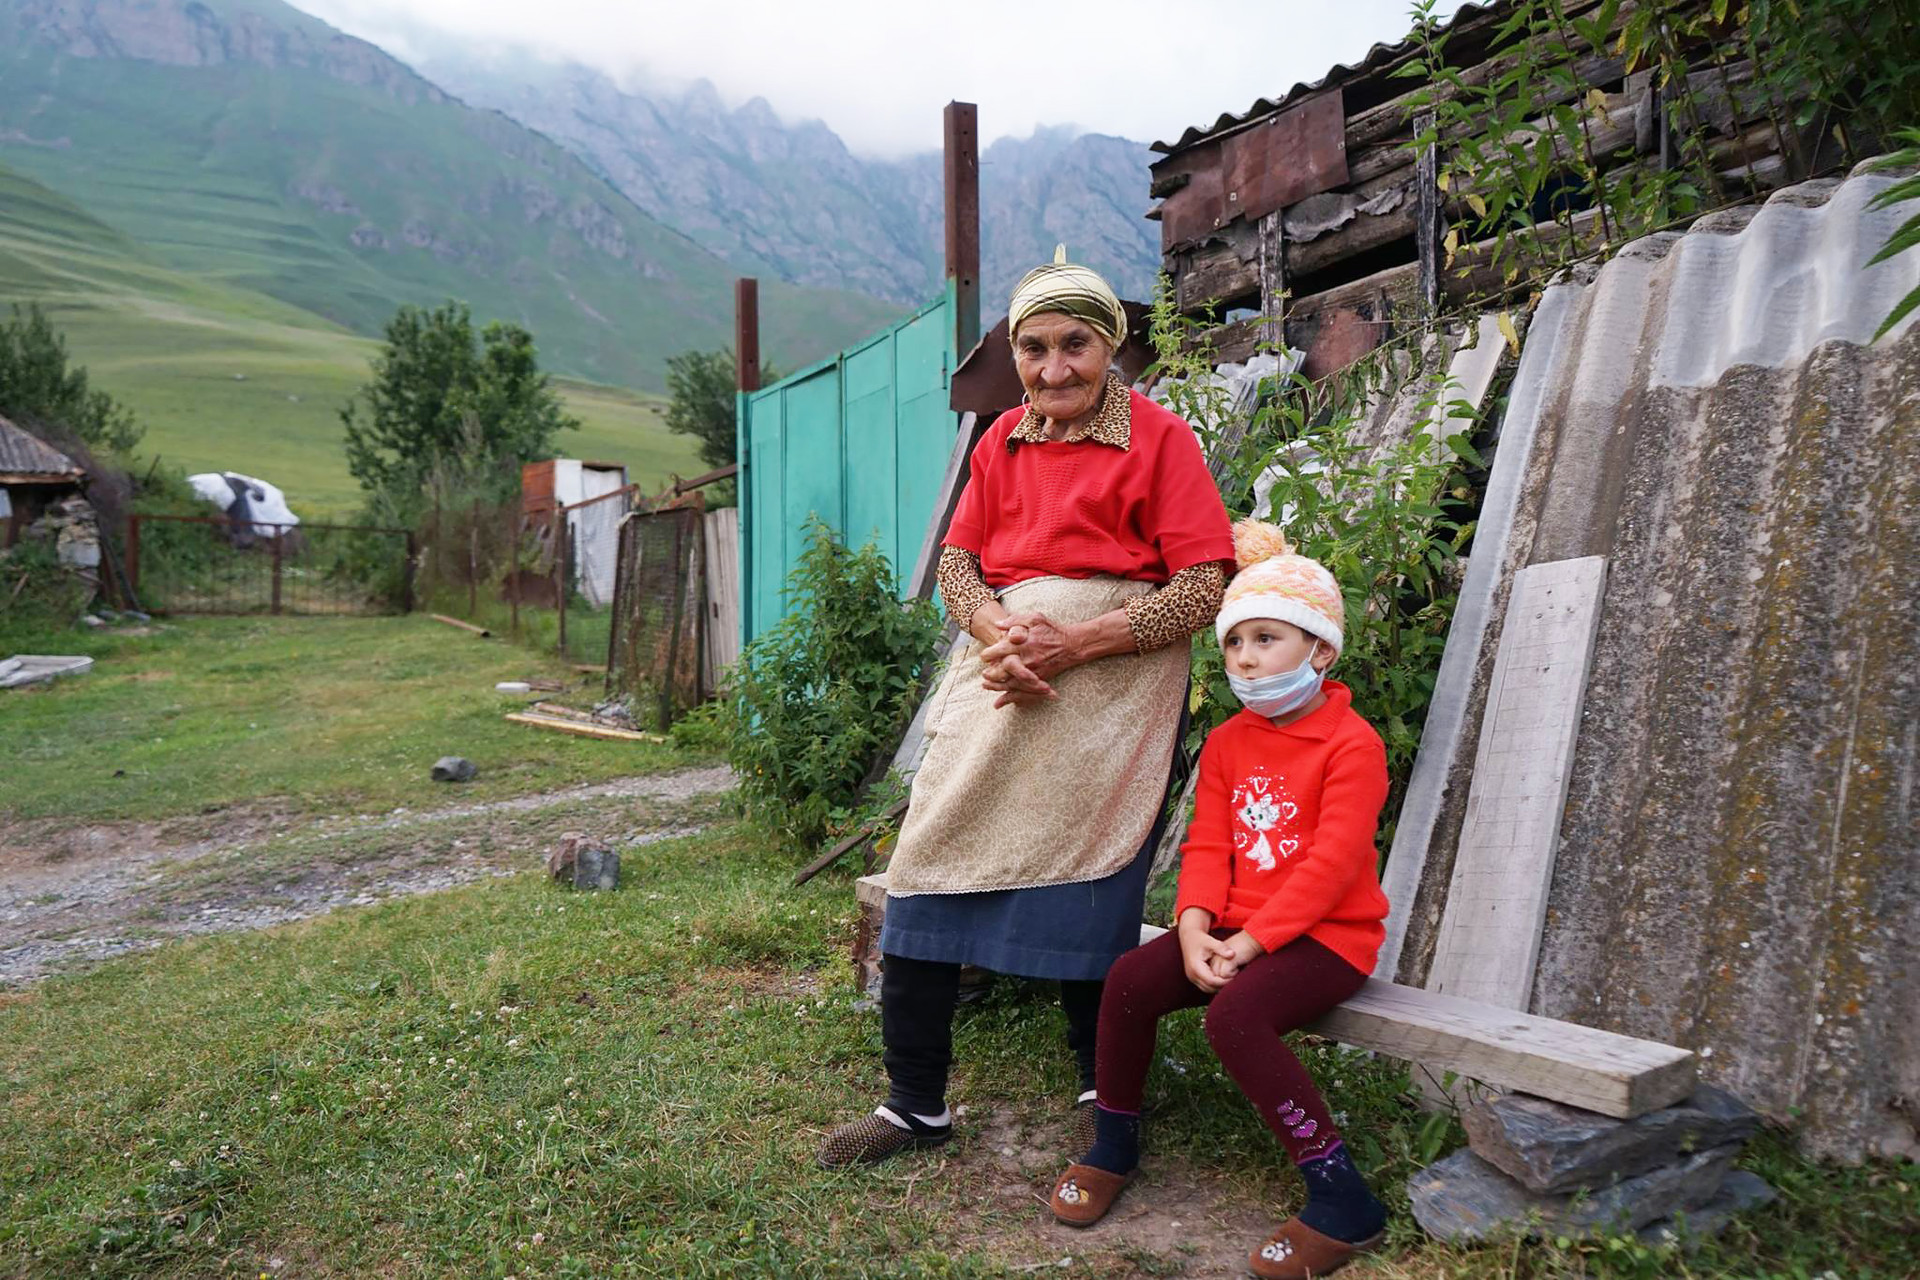 Zara and her great-granddaughter Jessica live in the tiny hamlet of Mairamikau in the Karmadon Gorge in Russia's North Ossetia-Alania region. Zara has been living here all her life and is very happy. The Caucasus is said to be the region of the world with the highest concentration of centenarians. 